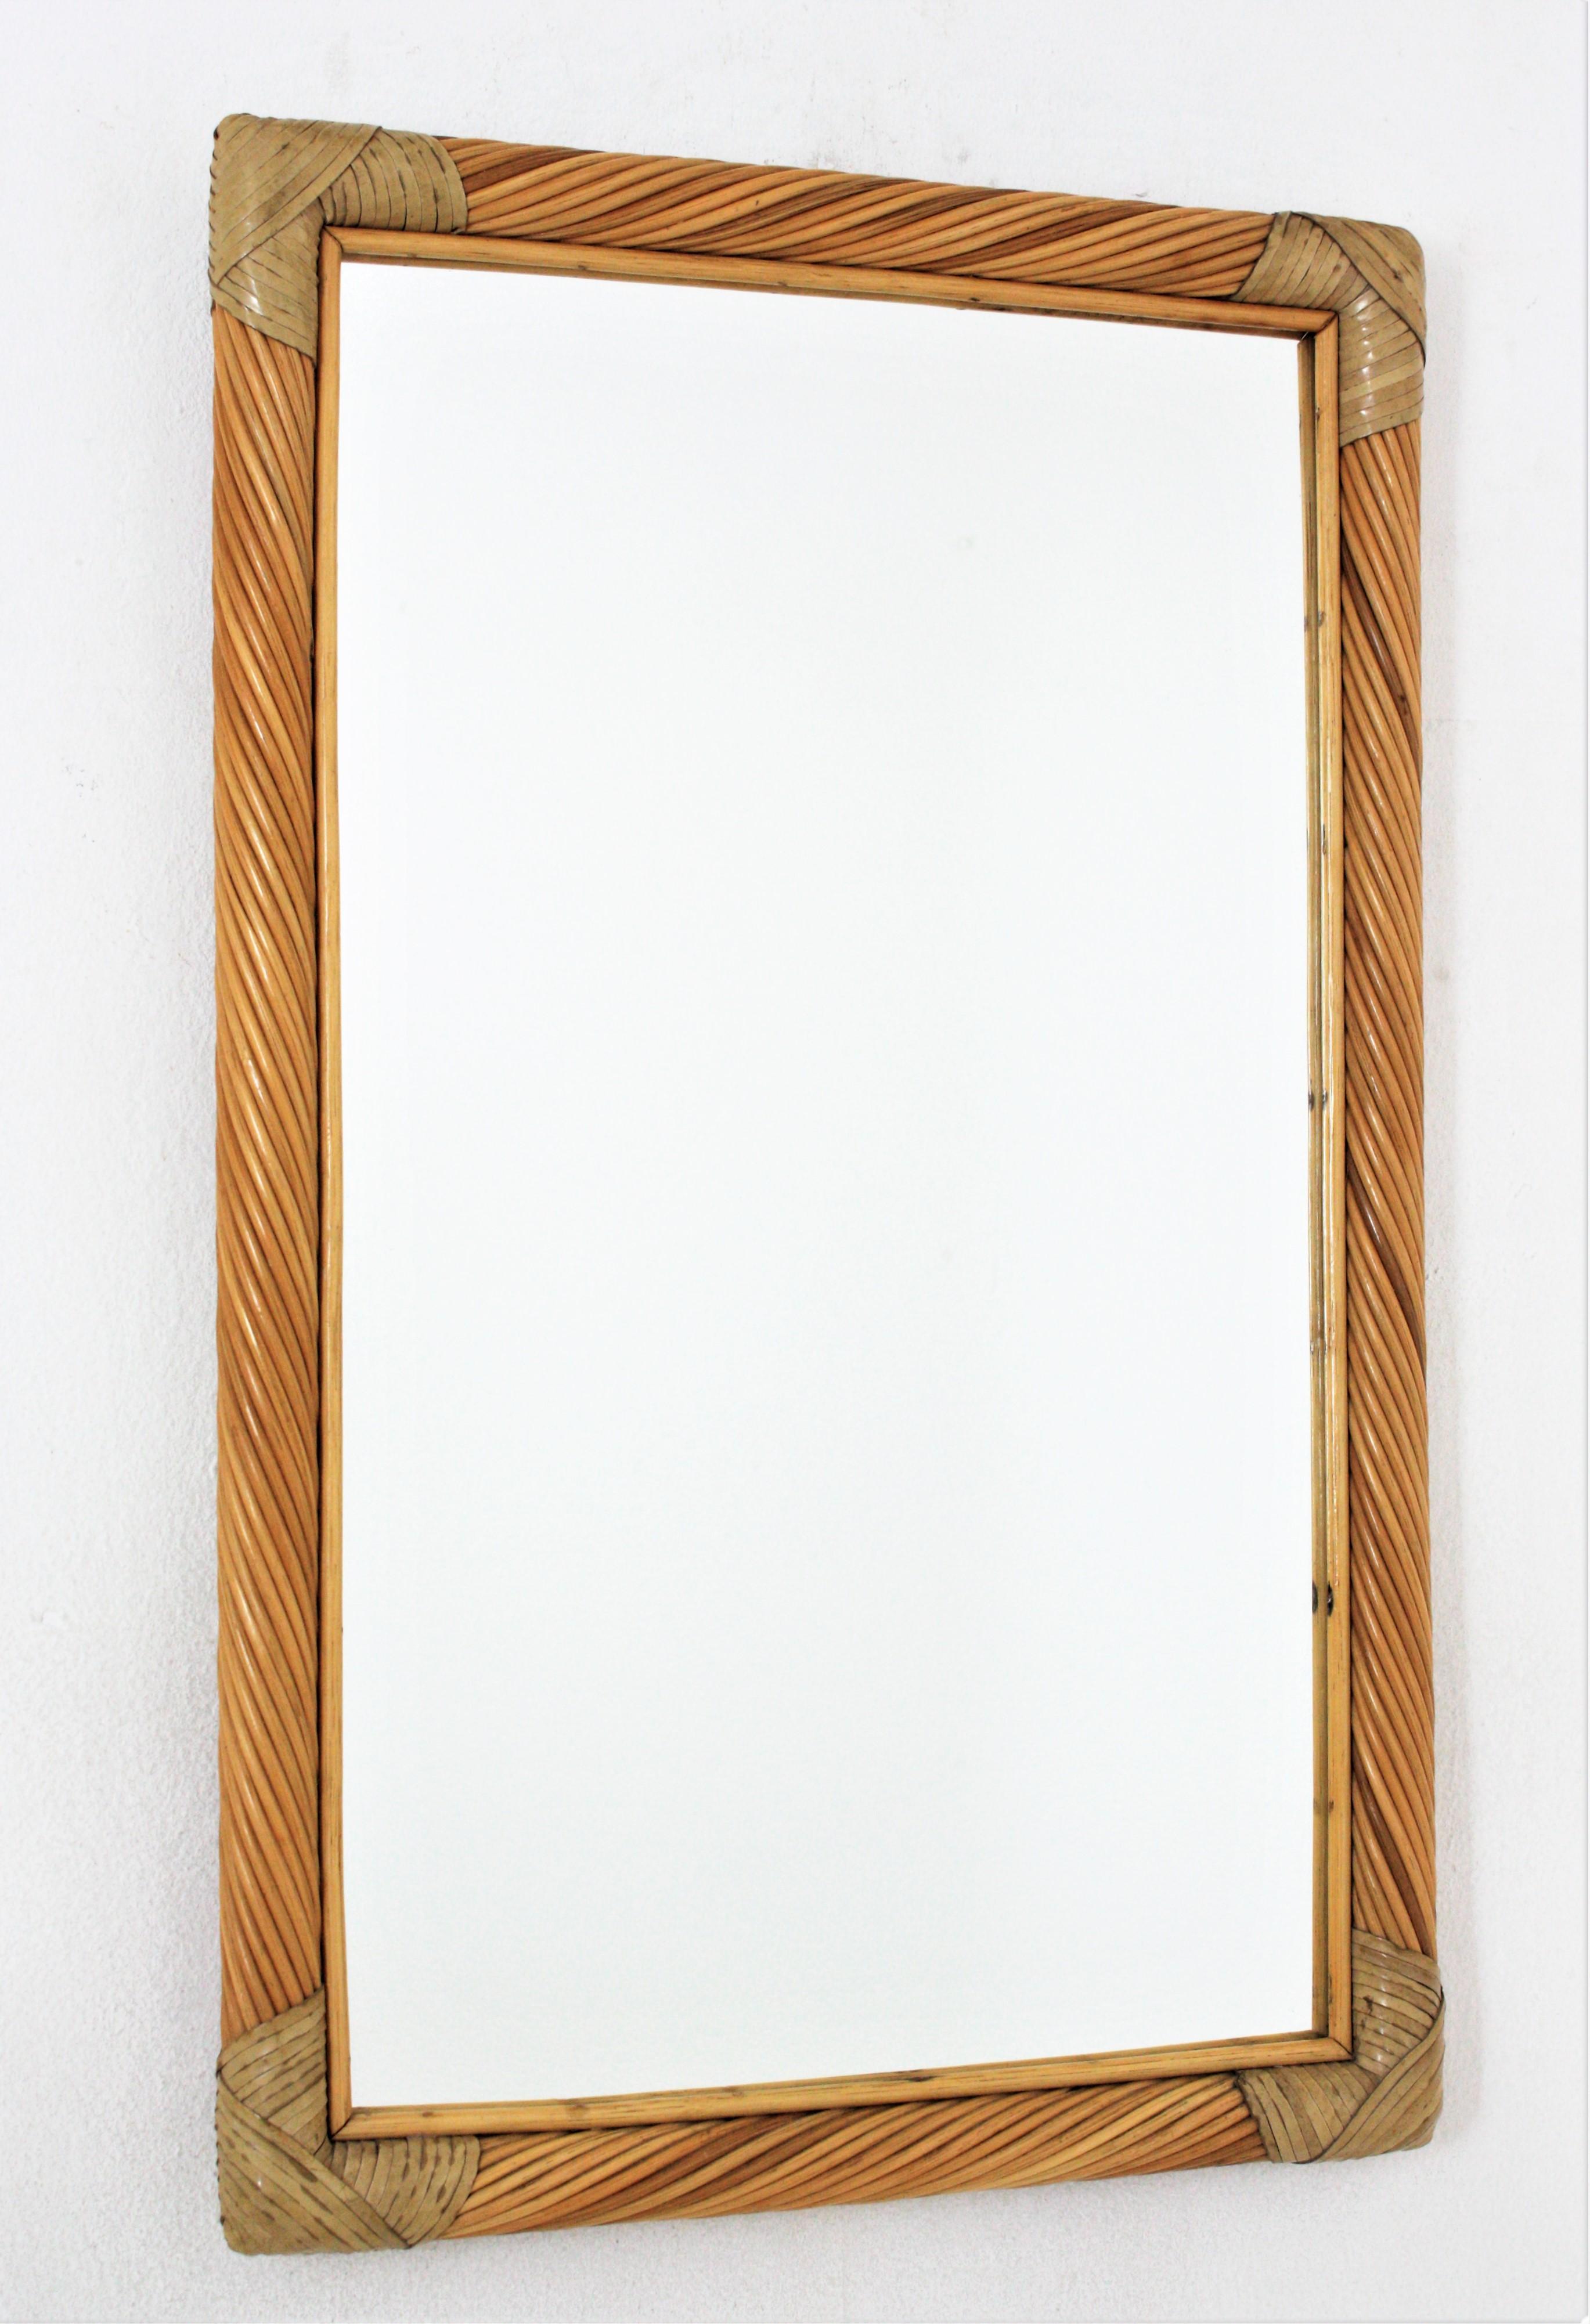 Rectangular wall mirror, Pencil Reed, Rattan, Leather, Italy, 1960s.
Eye-catching rattan mirror. The frame has a nice construction with twisted pencil reed rattan canes. It has leather strip tied details on the corners.
To be used as wall mirror in